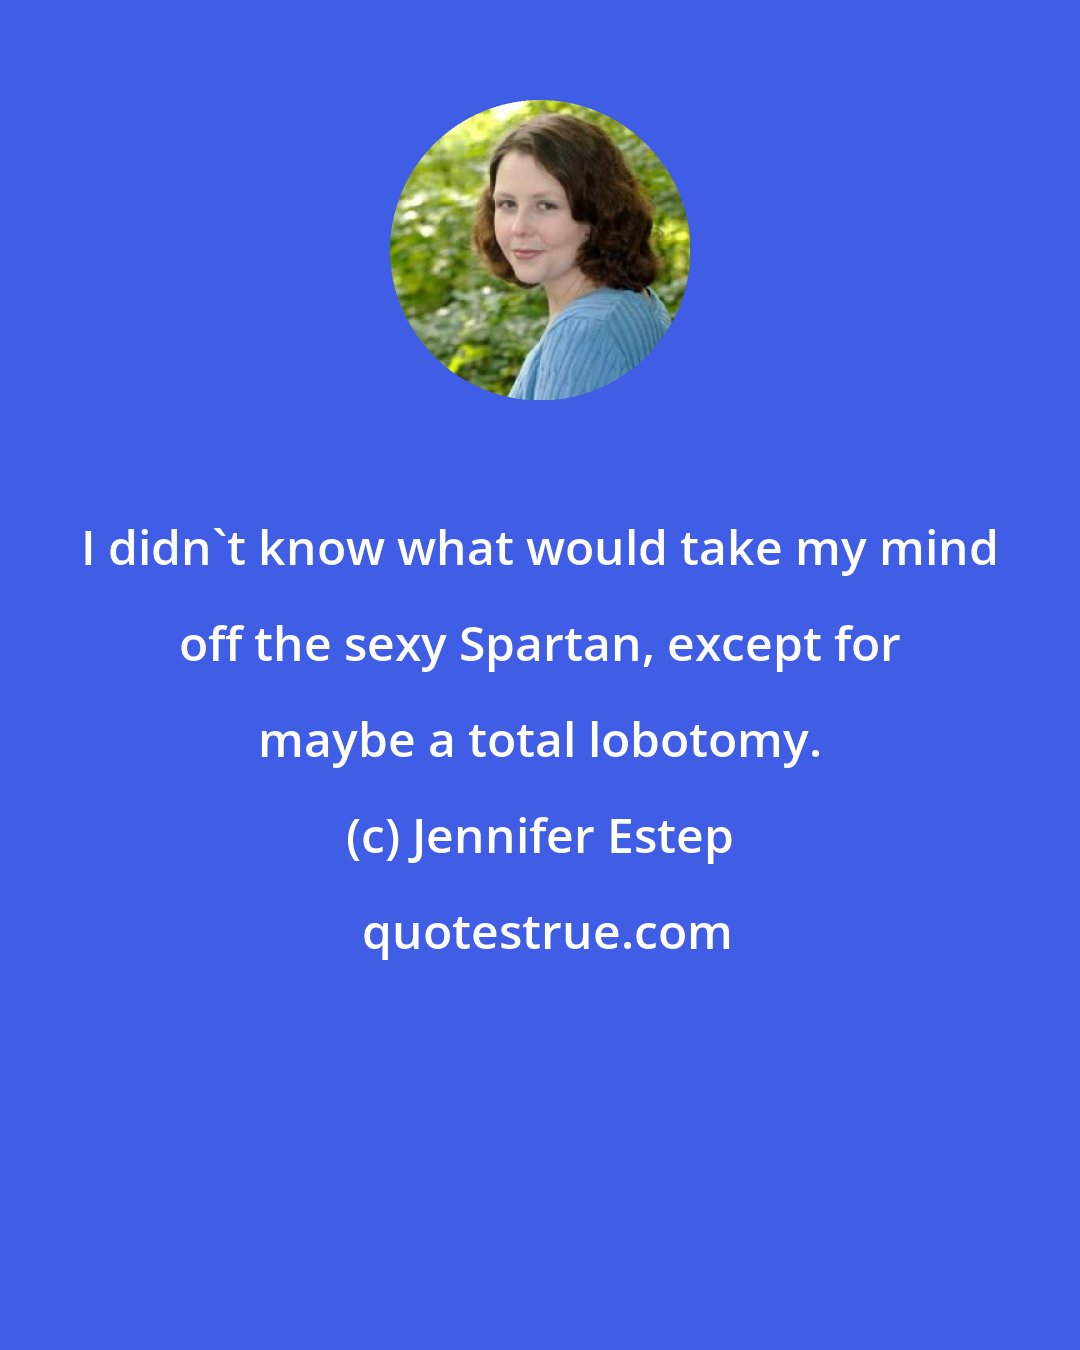 Jennifer Estep: I didn't know what would take my mind off the sexy Spartan, except for maybe a total lobotomy.